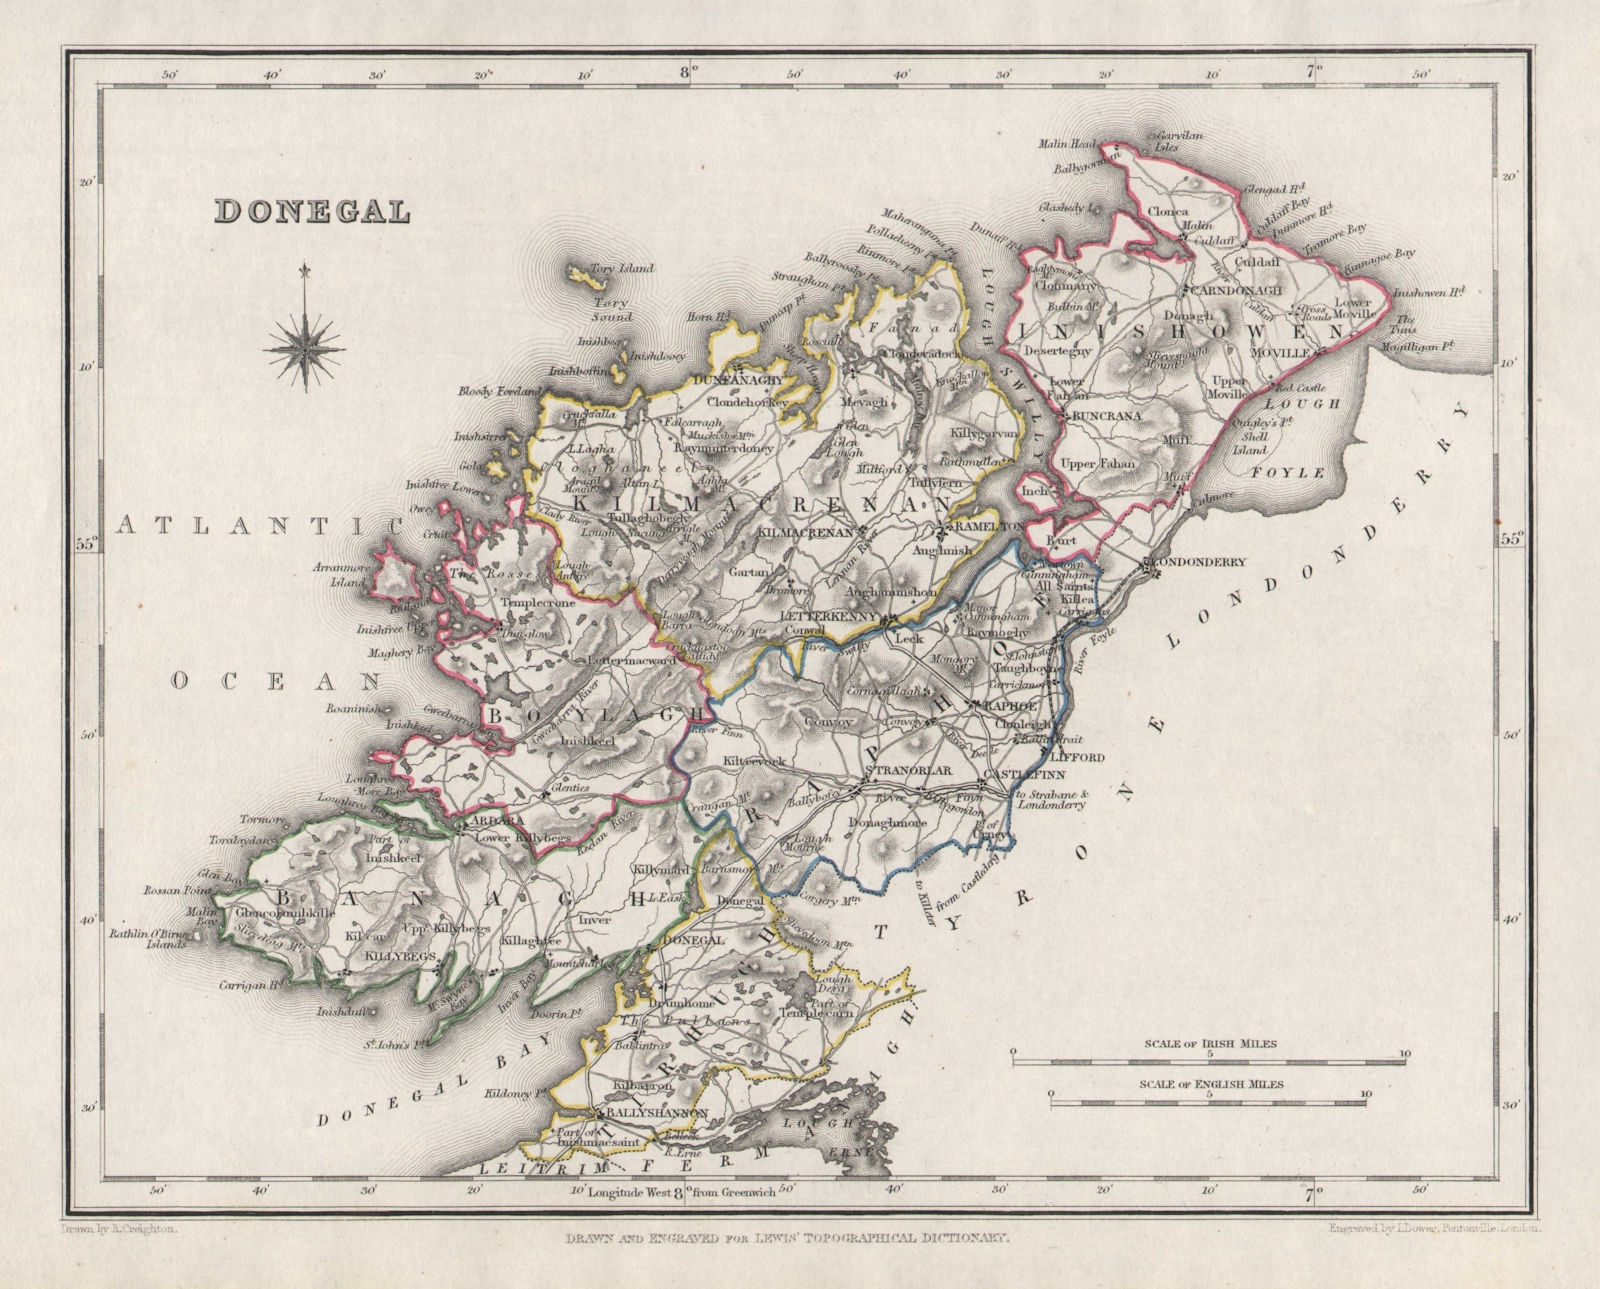 COUNTY DONEGAL antique map for LEWIS by CREIGHTON & DOWER. Ireland 1846